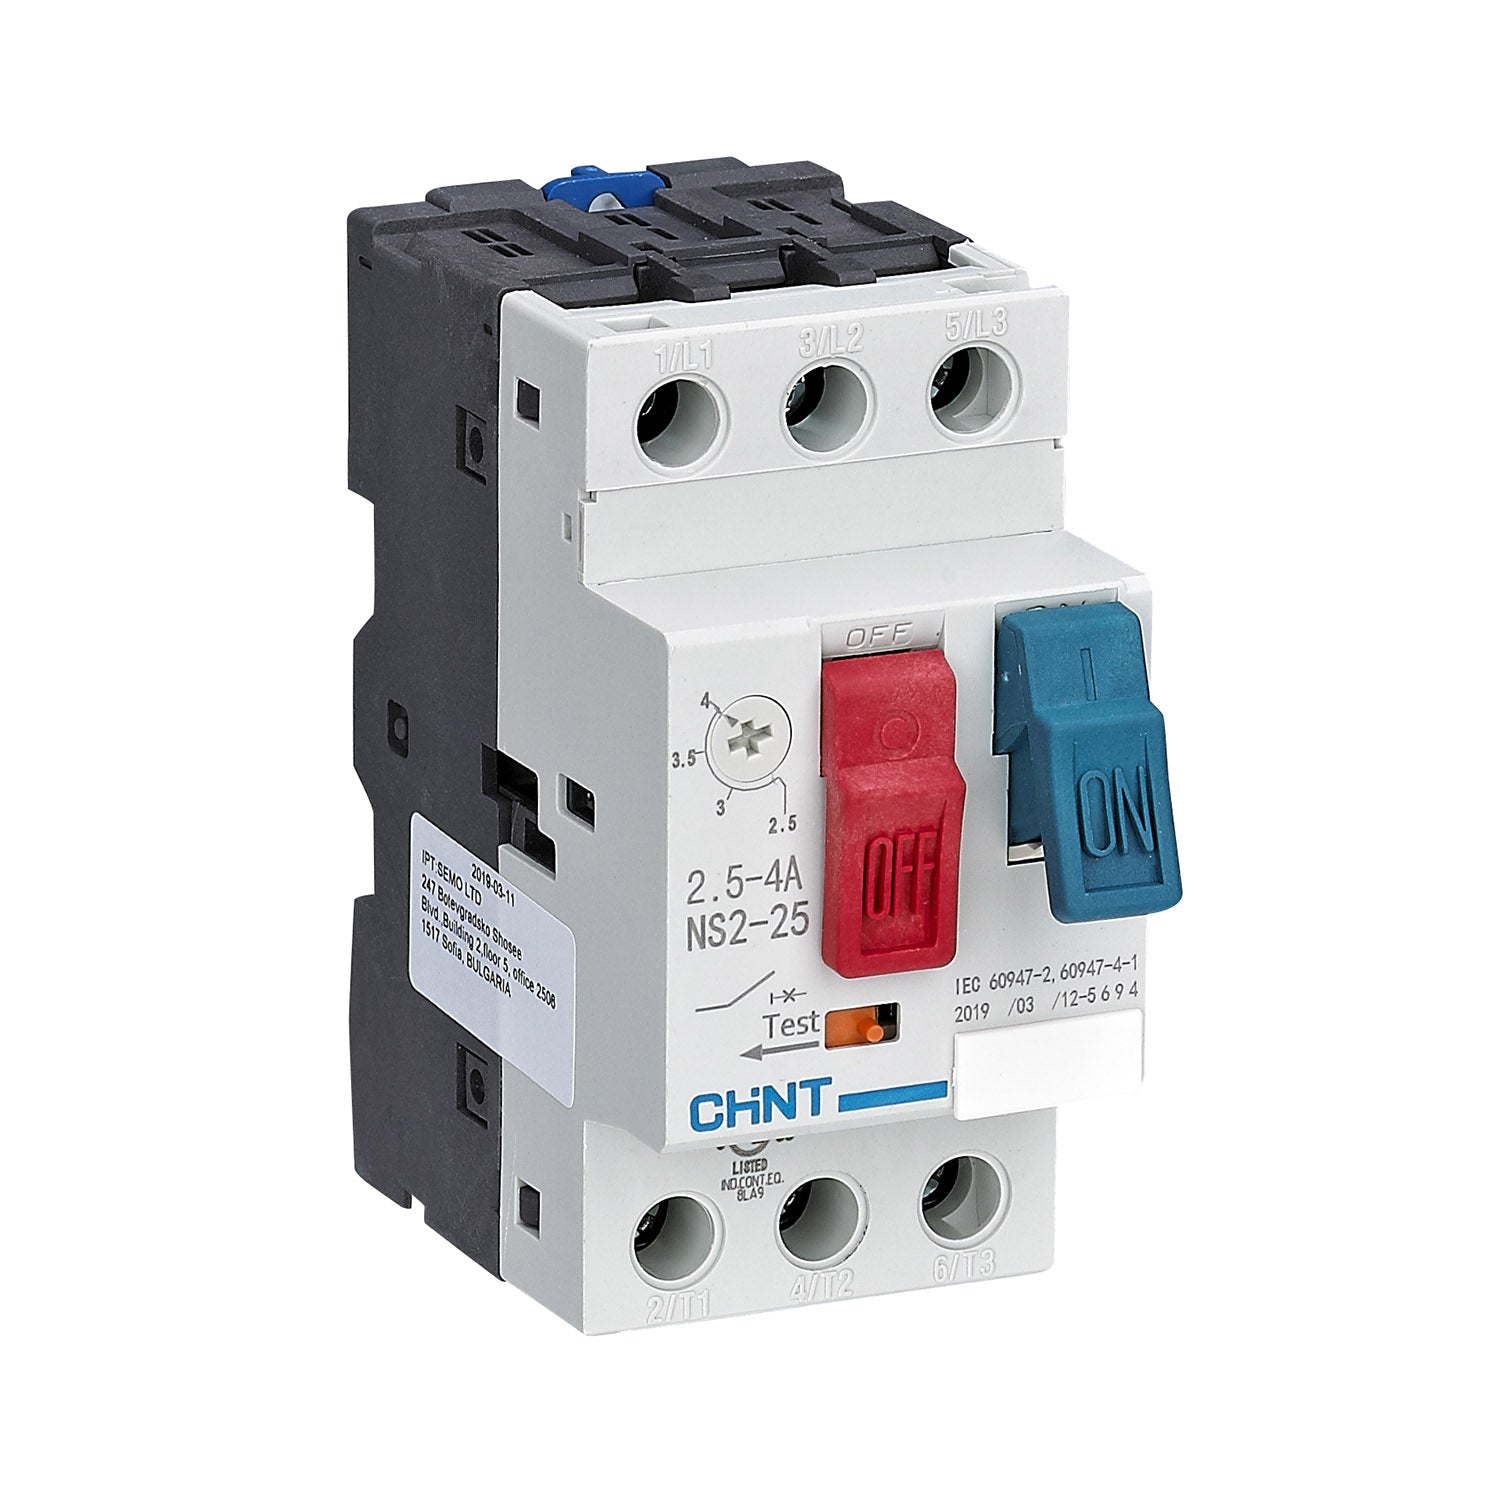 NS2-25 series motor protection switch with rocker arm 3P 2.5÷4A 100kA - CHINT